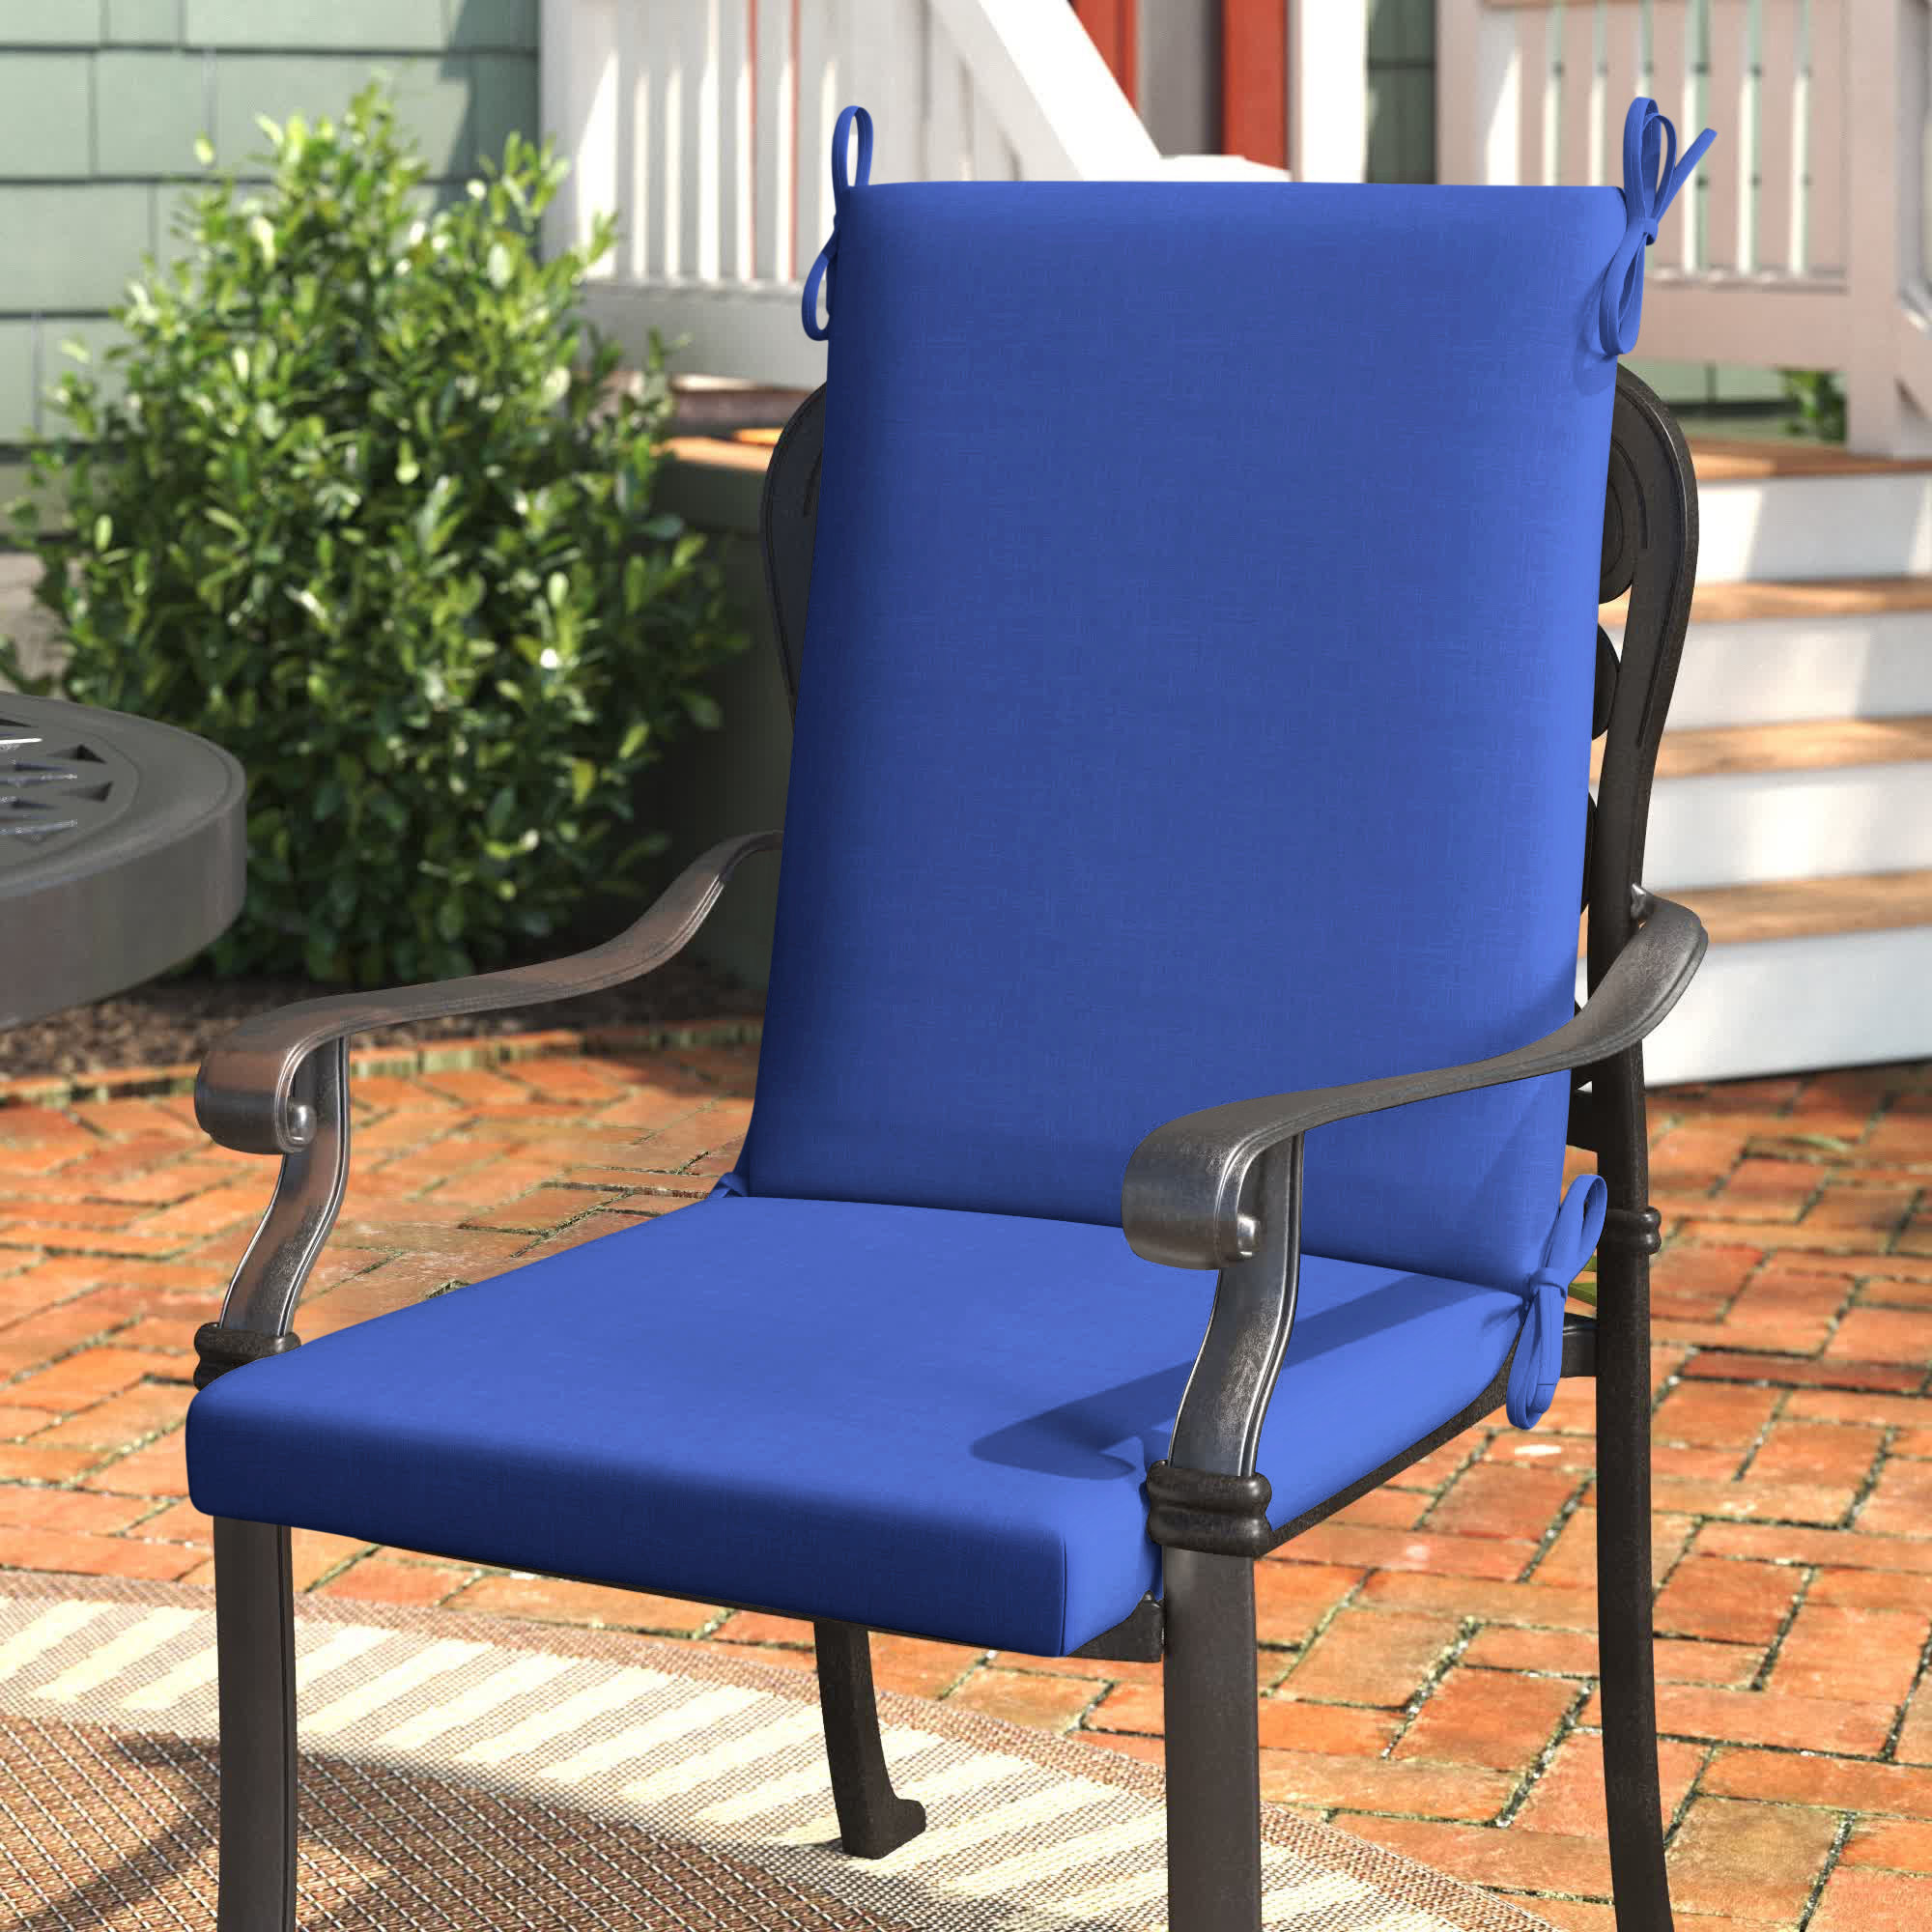 Details about   Outdoor Deep Seat Chair Patio Cushions Set Pad UV & Fade Resistant Furniture 24" 